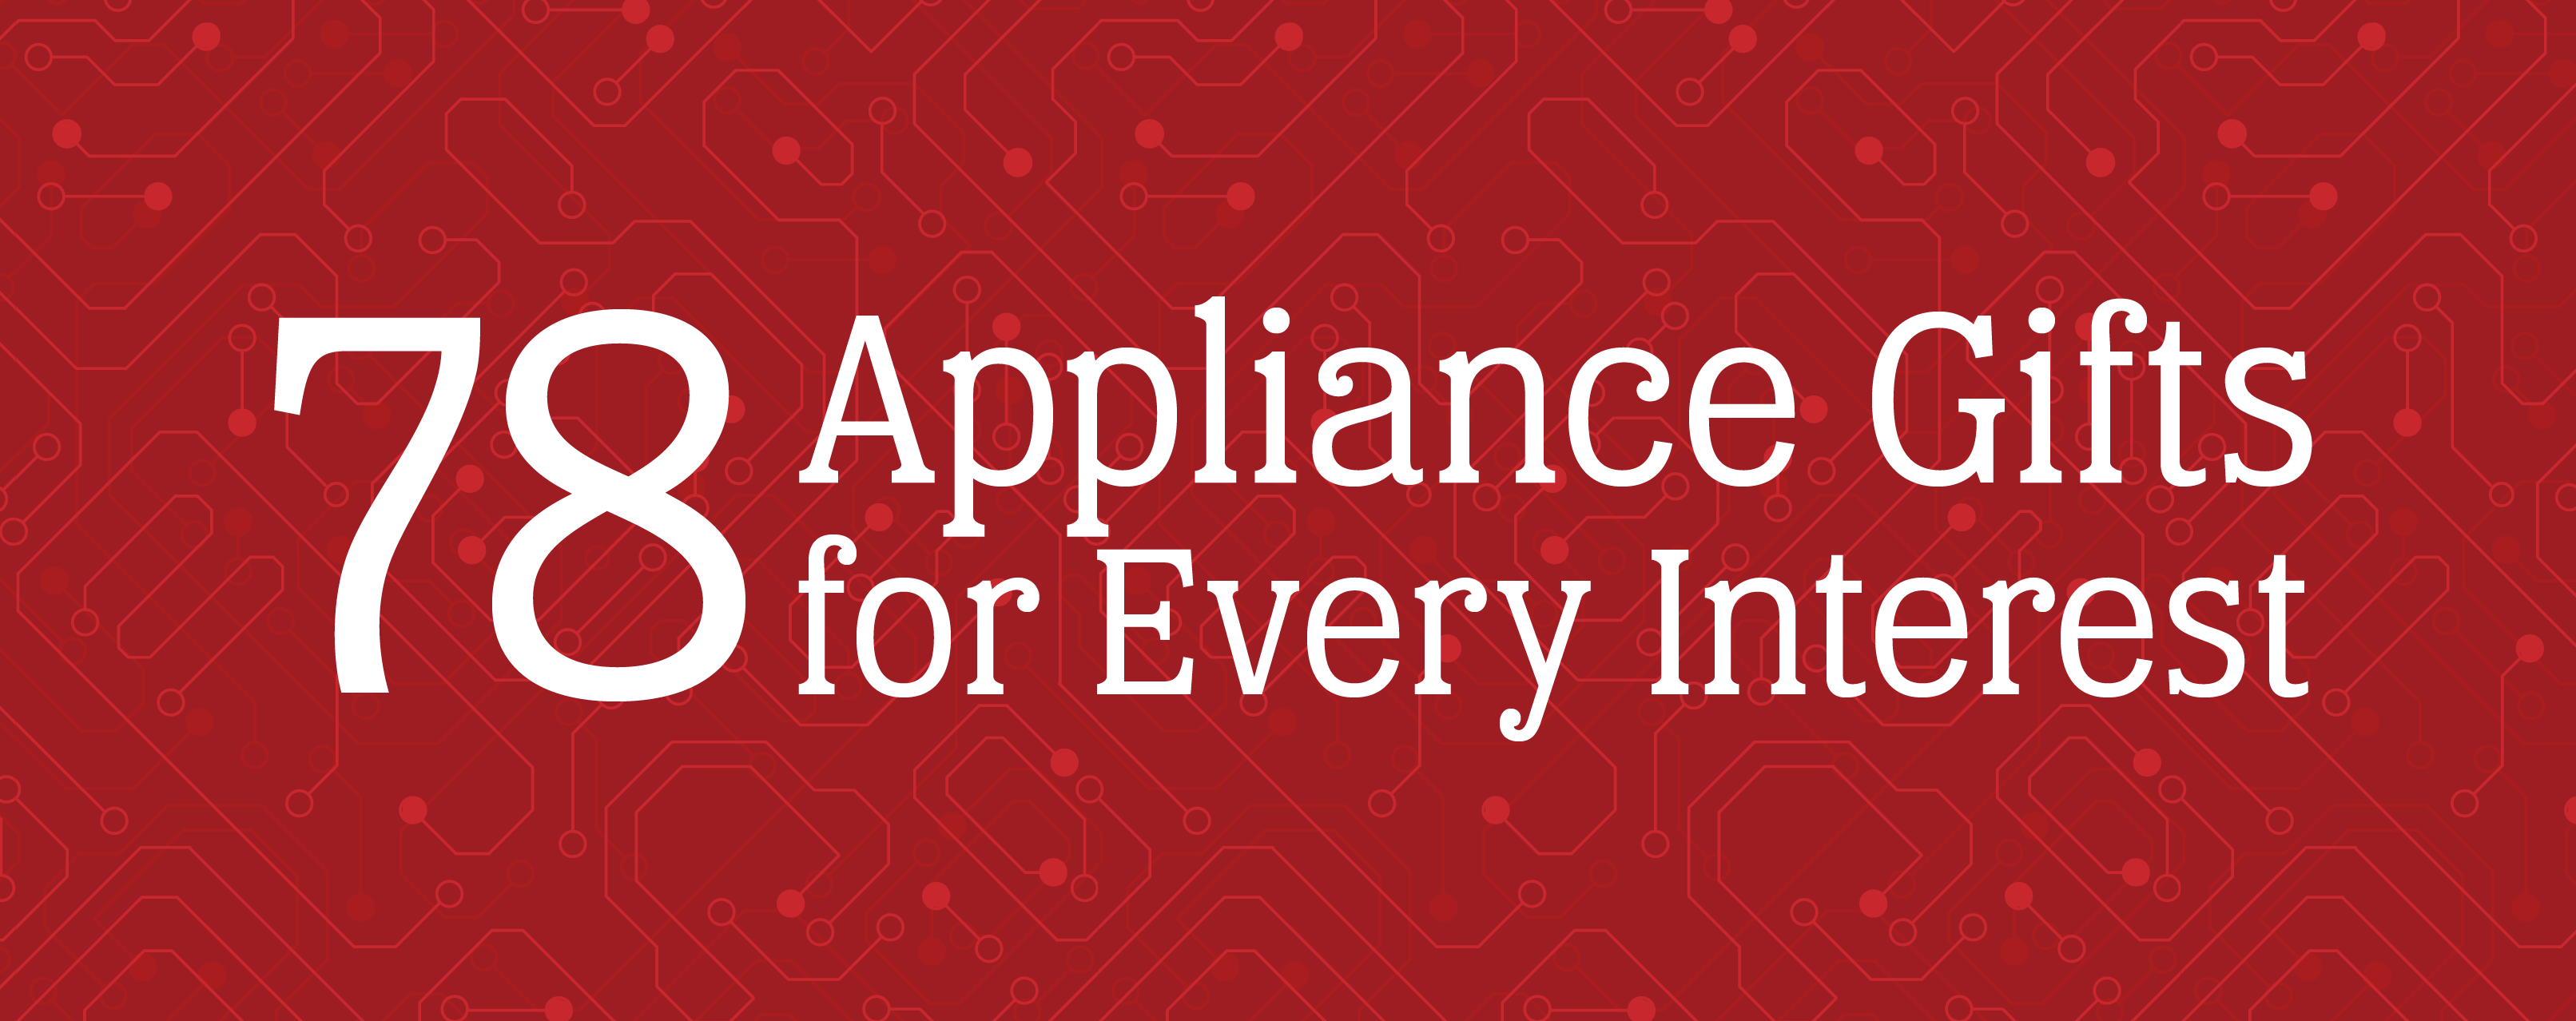 Red background with a circuit board pattern and a white text overlay that reads "78 Appliance Gifts for Every Interest"